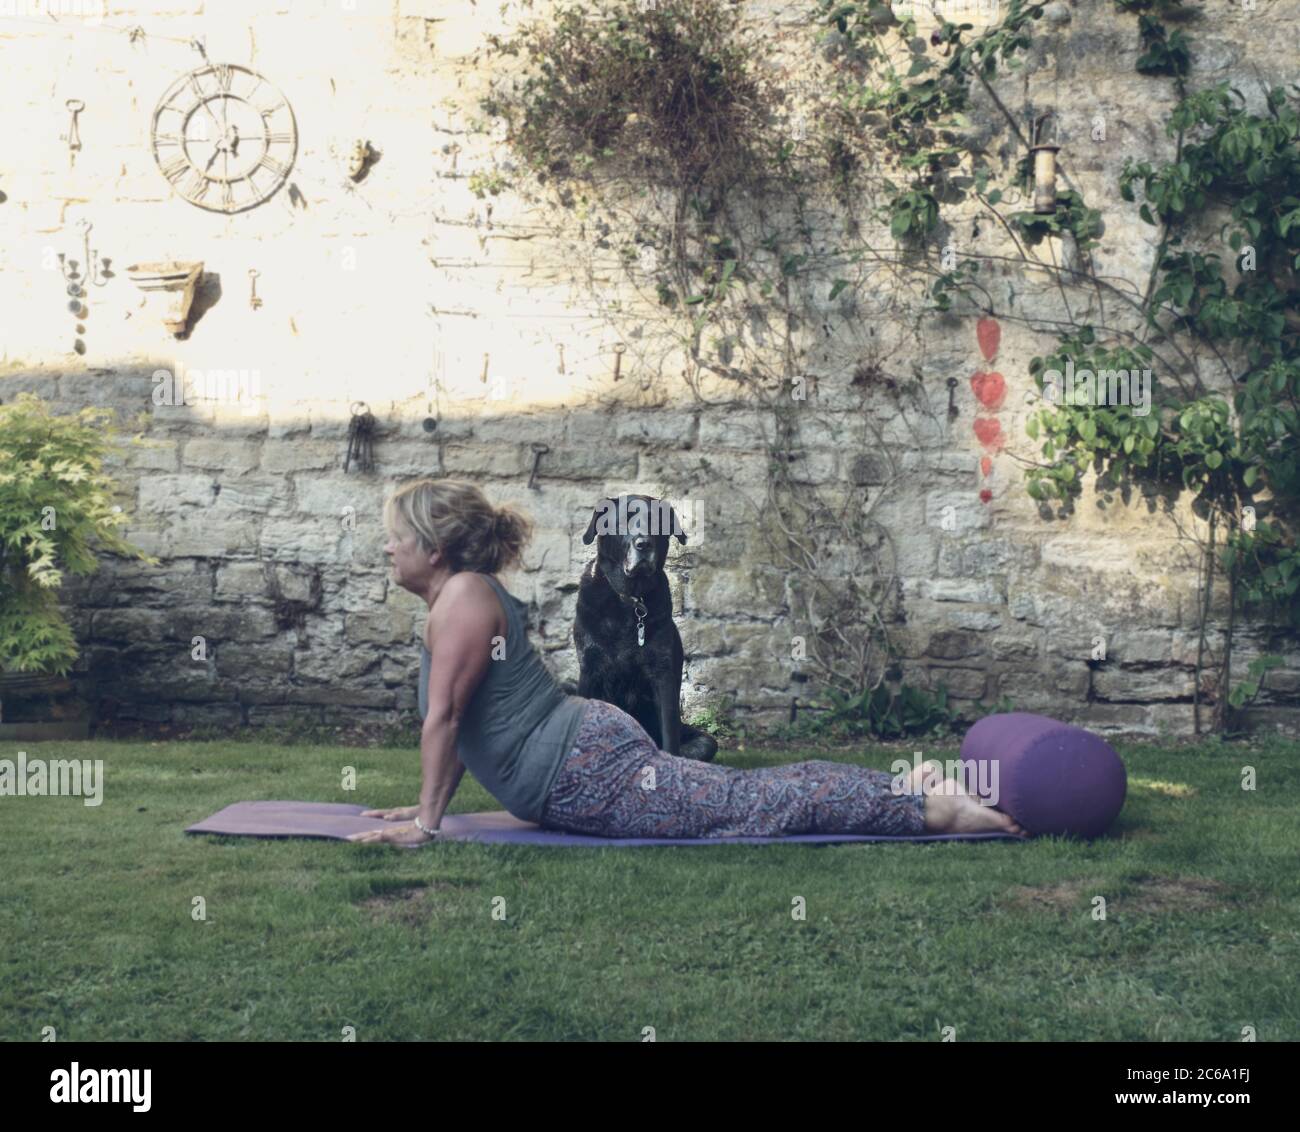 Middle aged woman doing yoga on a summers evening in the privacy of a walled garden accompanied by her black Labrador dog. Stock Photo